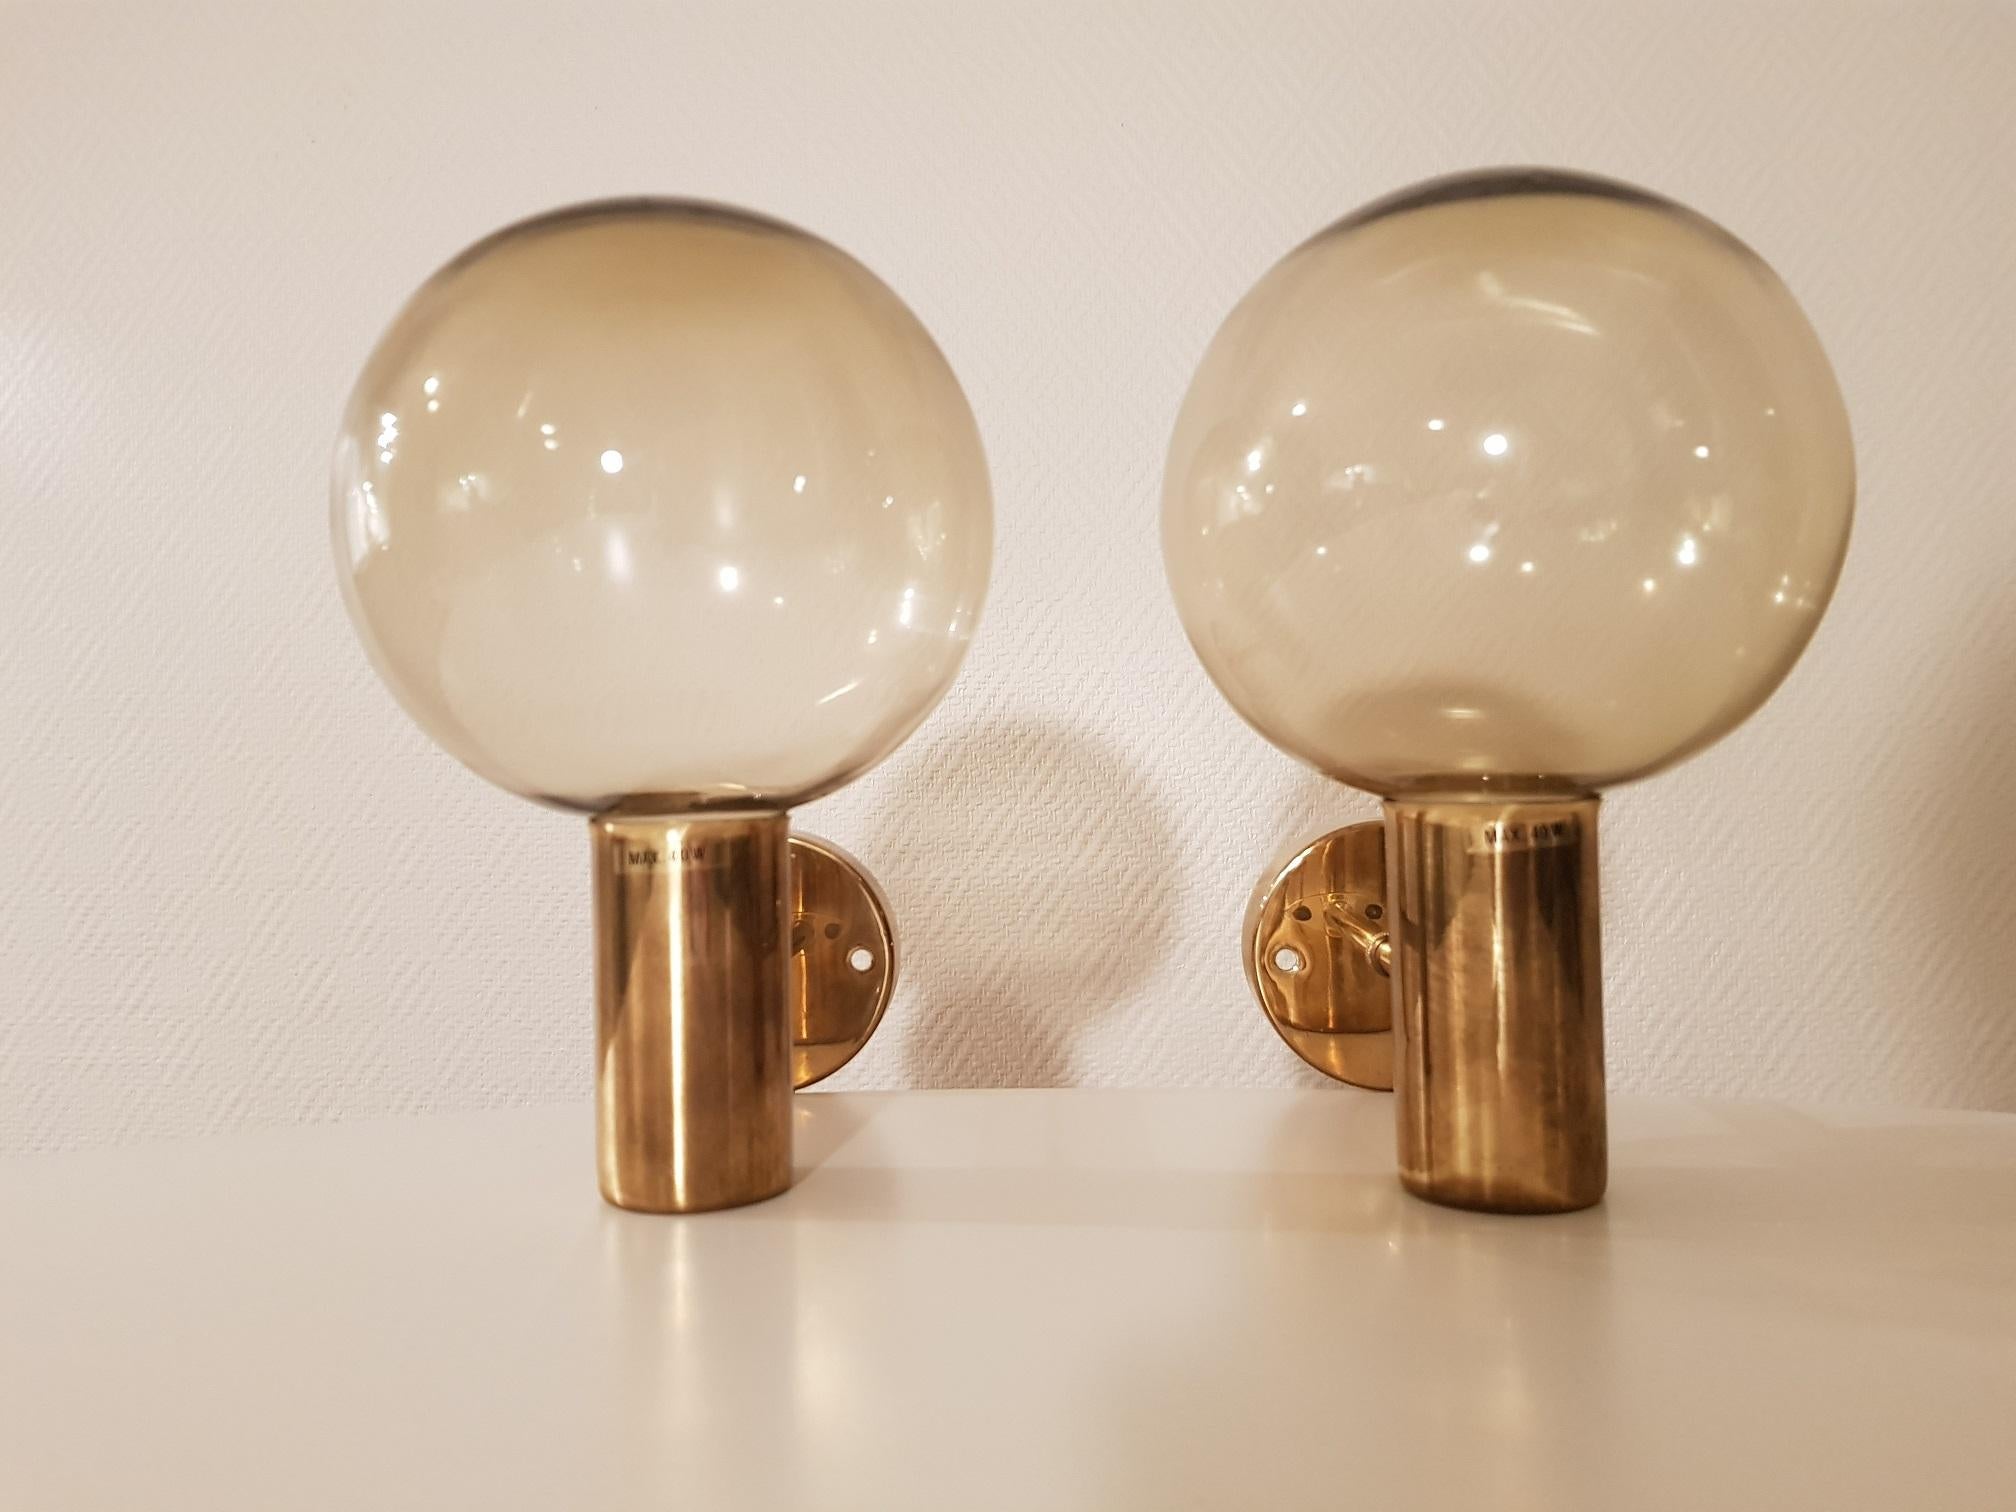 2 vintage wall lamps in brass and smoked glass. Produced in the 1960s. Made in Sweden by Hans-Agne Jakobsson AB in Markaryd. Designed by the famous Swedish designer Hans-Agne Jakobsson. The wall lamps are named model V149.